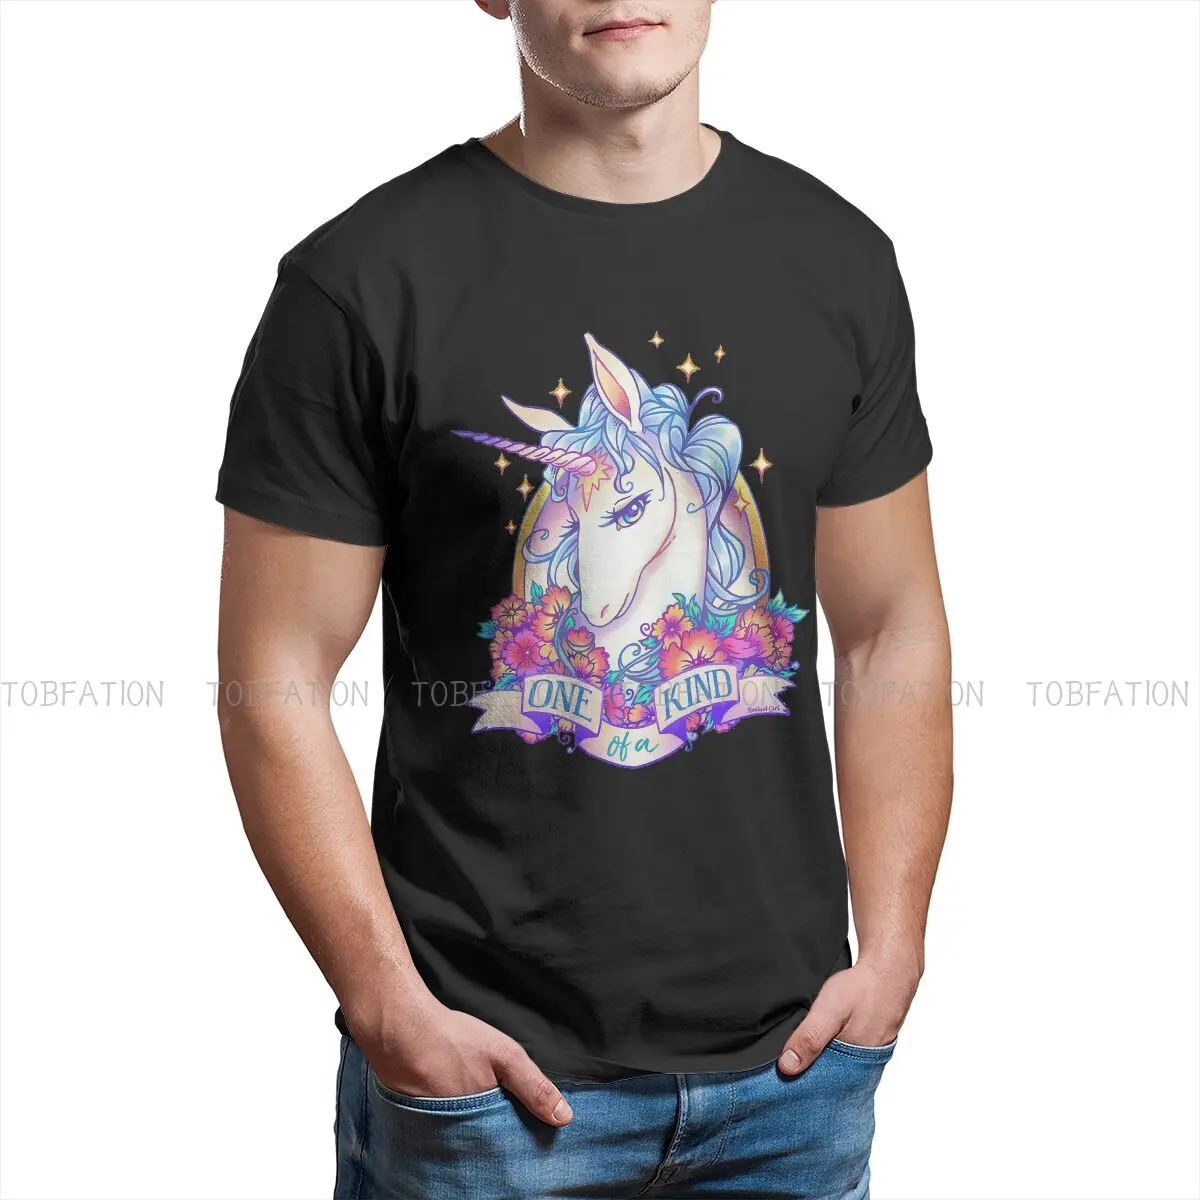 

The Last Unicorn Peter S. Beagle Magic Original TShirts One Of A Kind Creature Personalize Homme T Shirt Funny Clothing 6XL